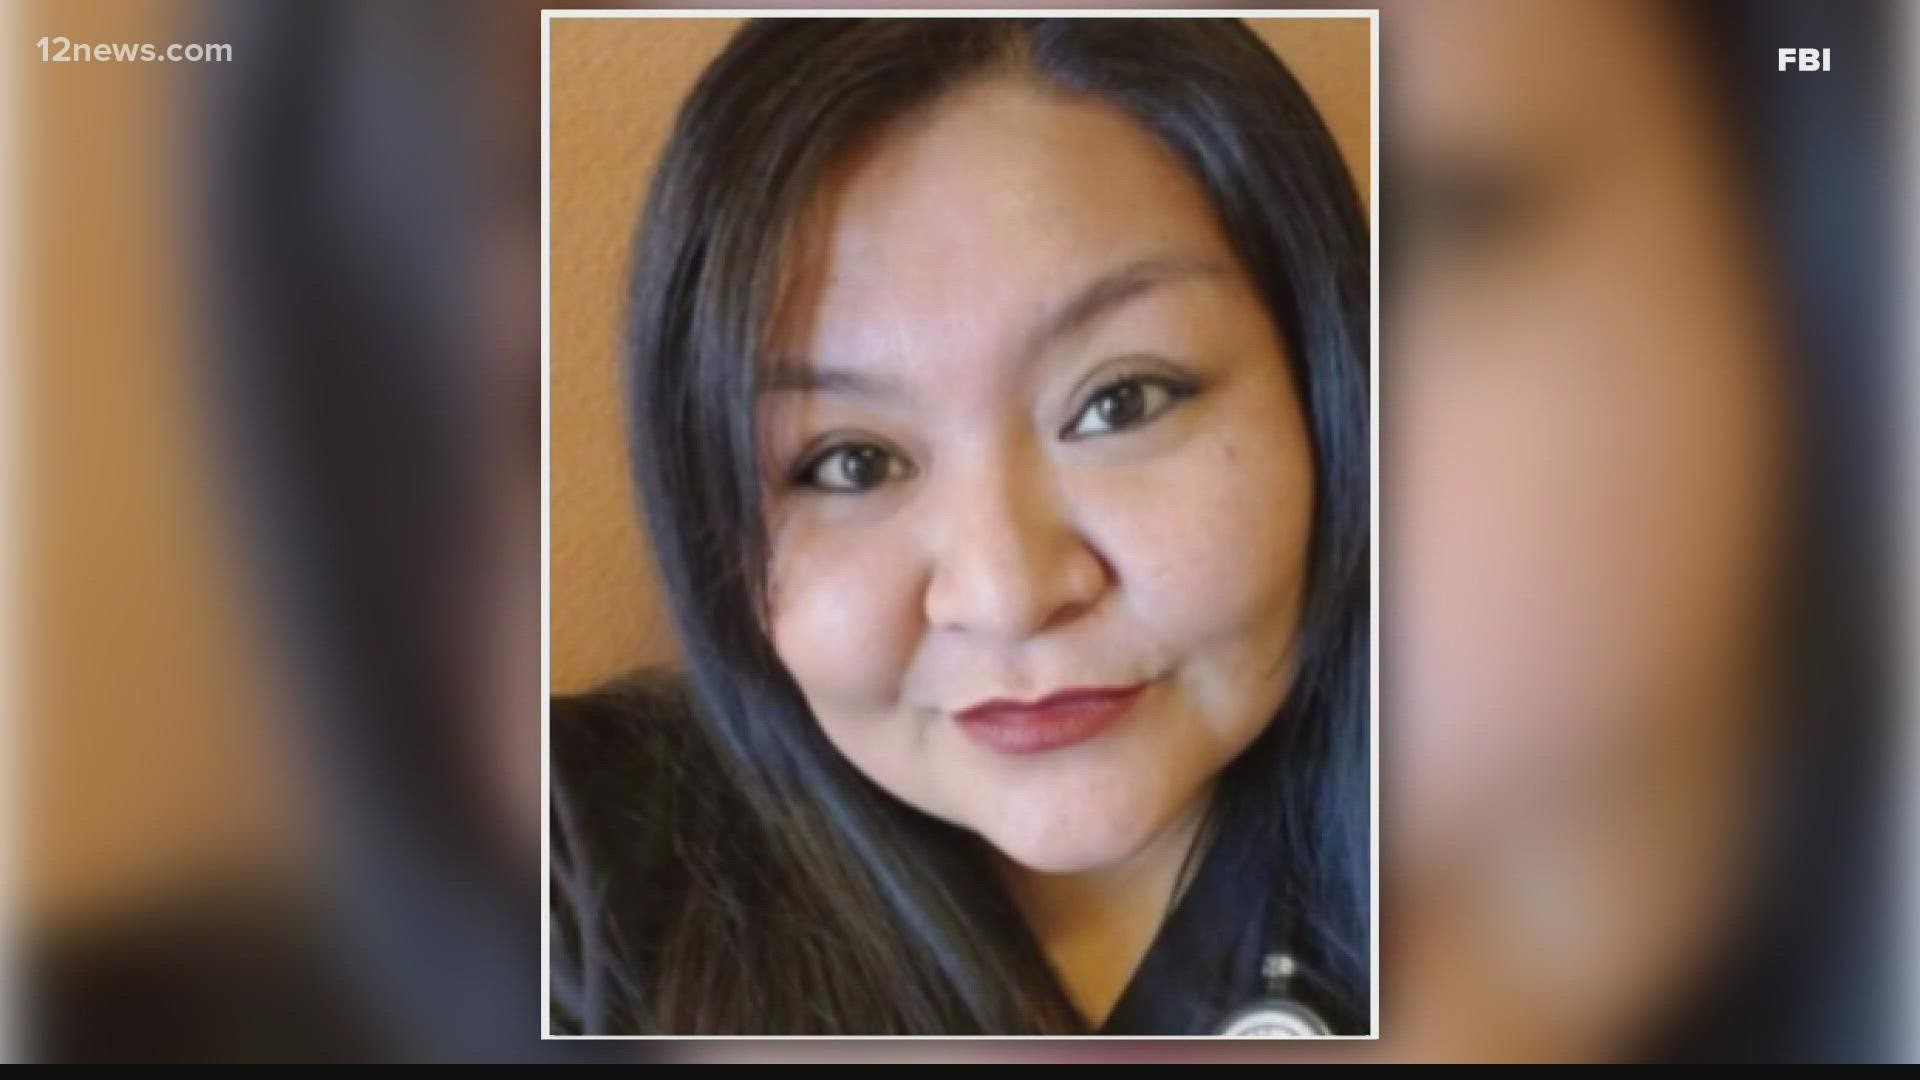 Navajo Nation President Jonathan Nez announced this week that Jamie Lynette Yazzie, a local woman who's been missing since June 2019, has been found deceased.